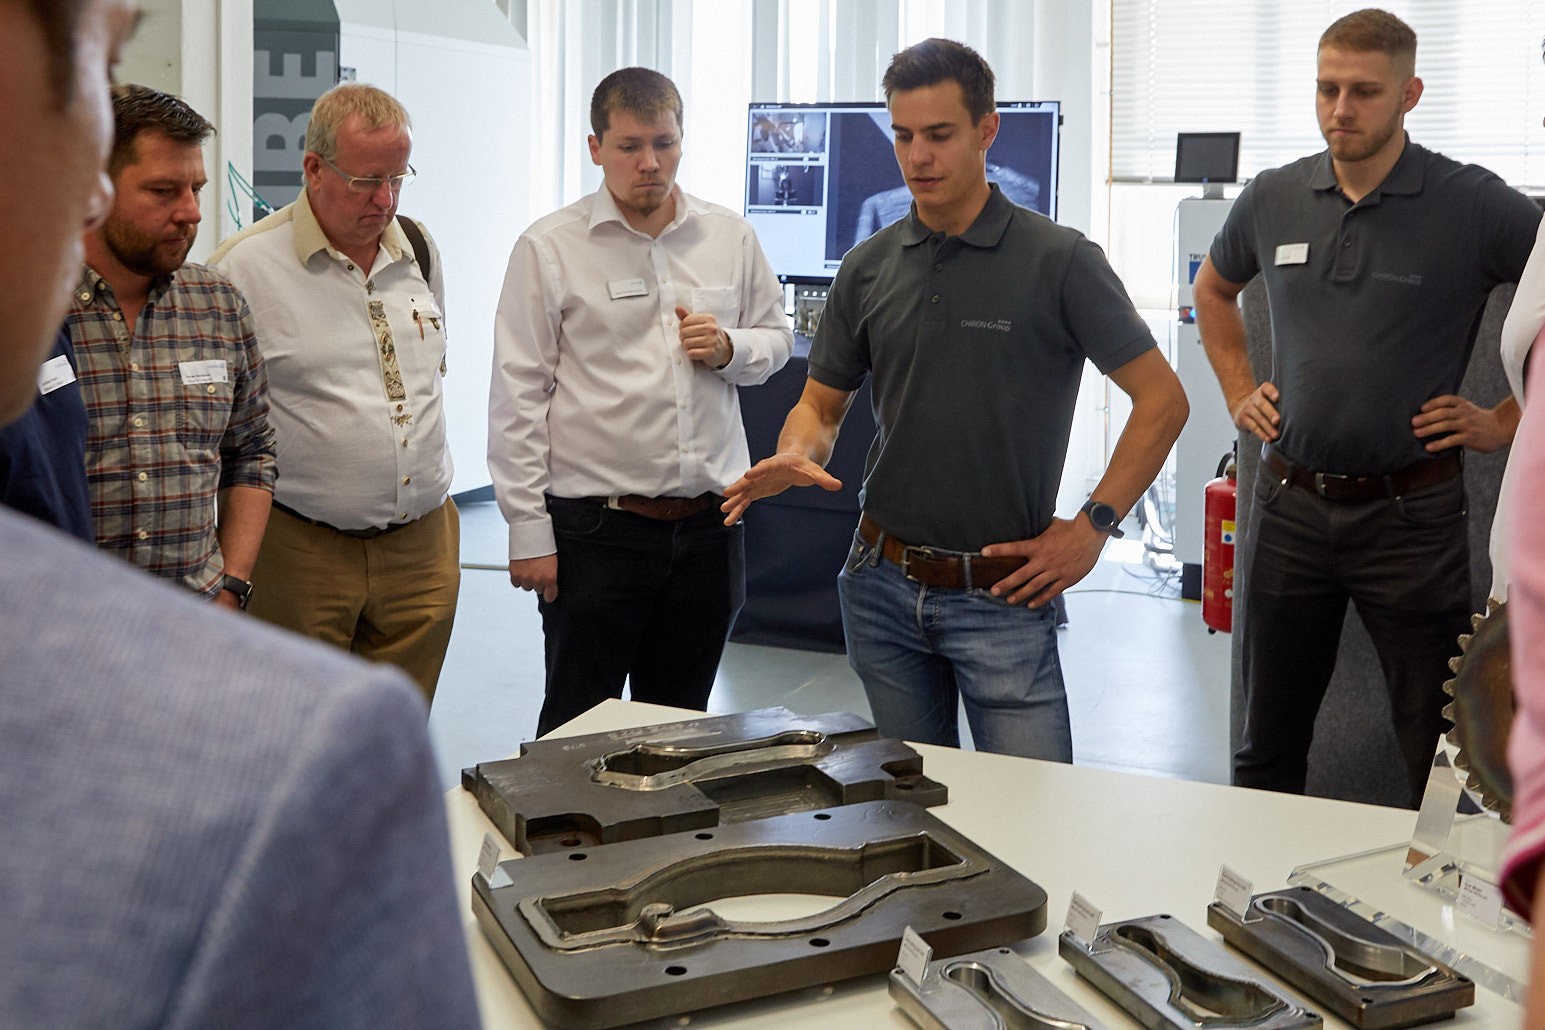 Dies with special requirements for LMD repair – explained in detail by Quentin Leibinger, Application Engineer Additive Manufacturing at the CHIRON Group.